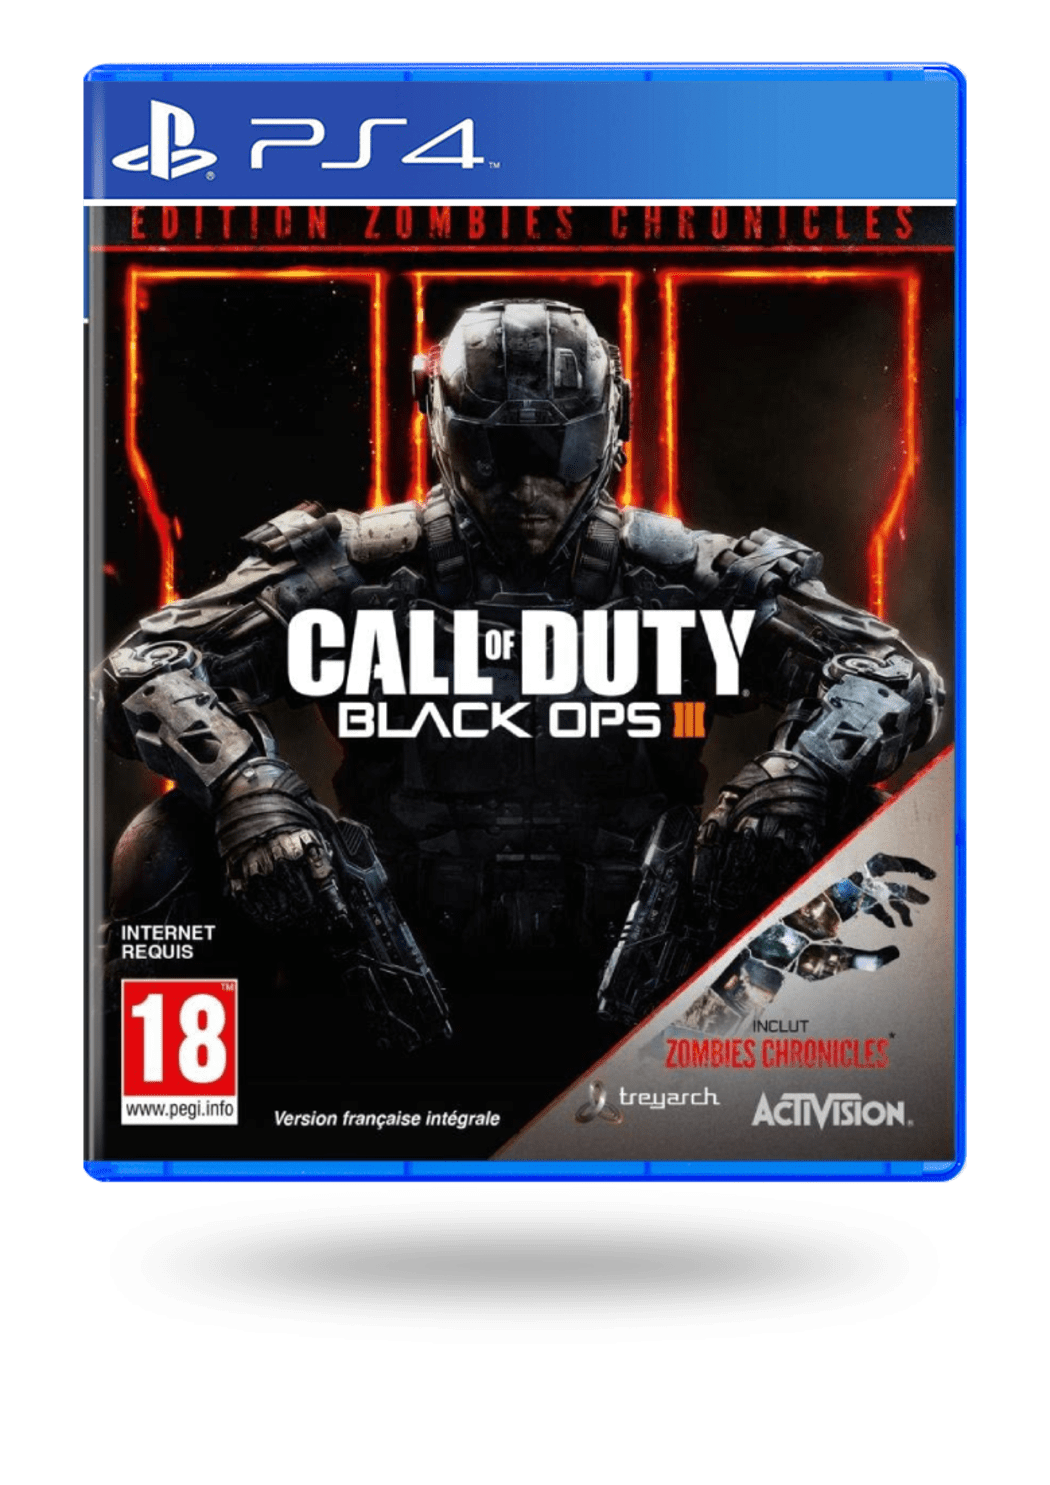 Buy Call of Duty: Black Ops 3 Zombies Cronicles Edition PS4 CD! Cheap price ENEBA